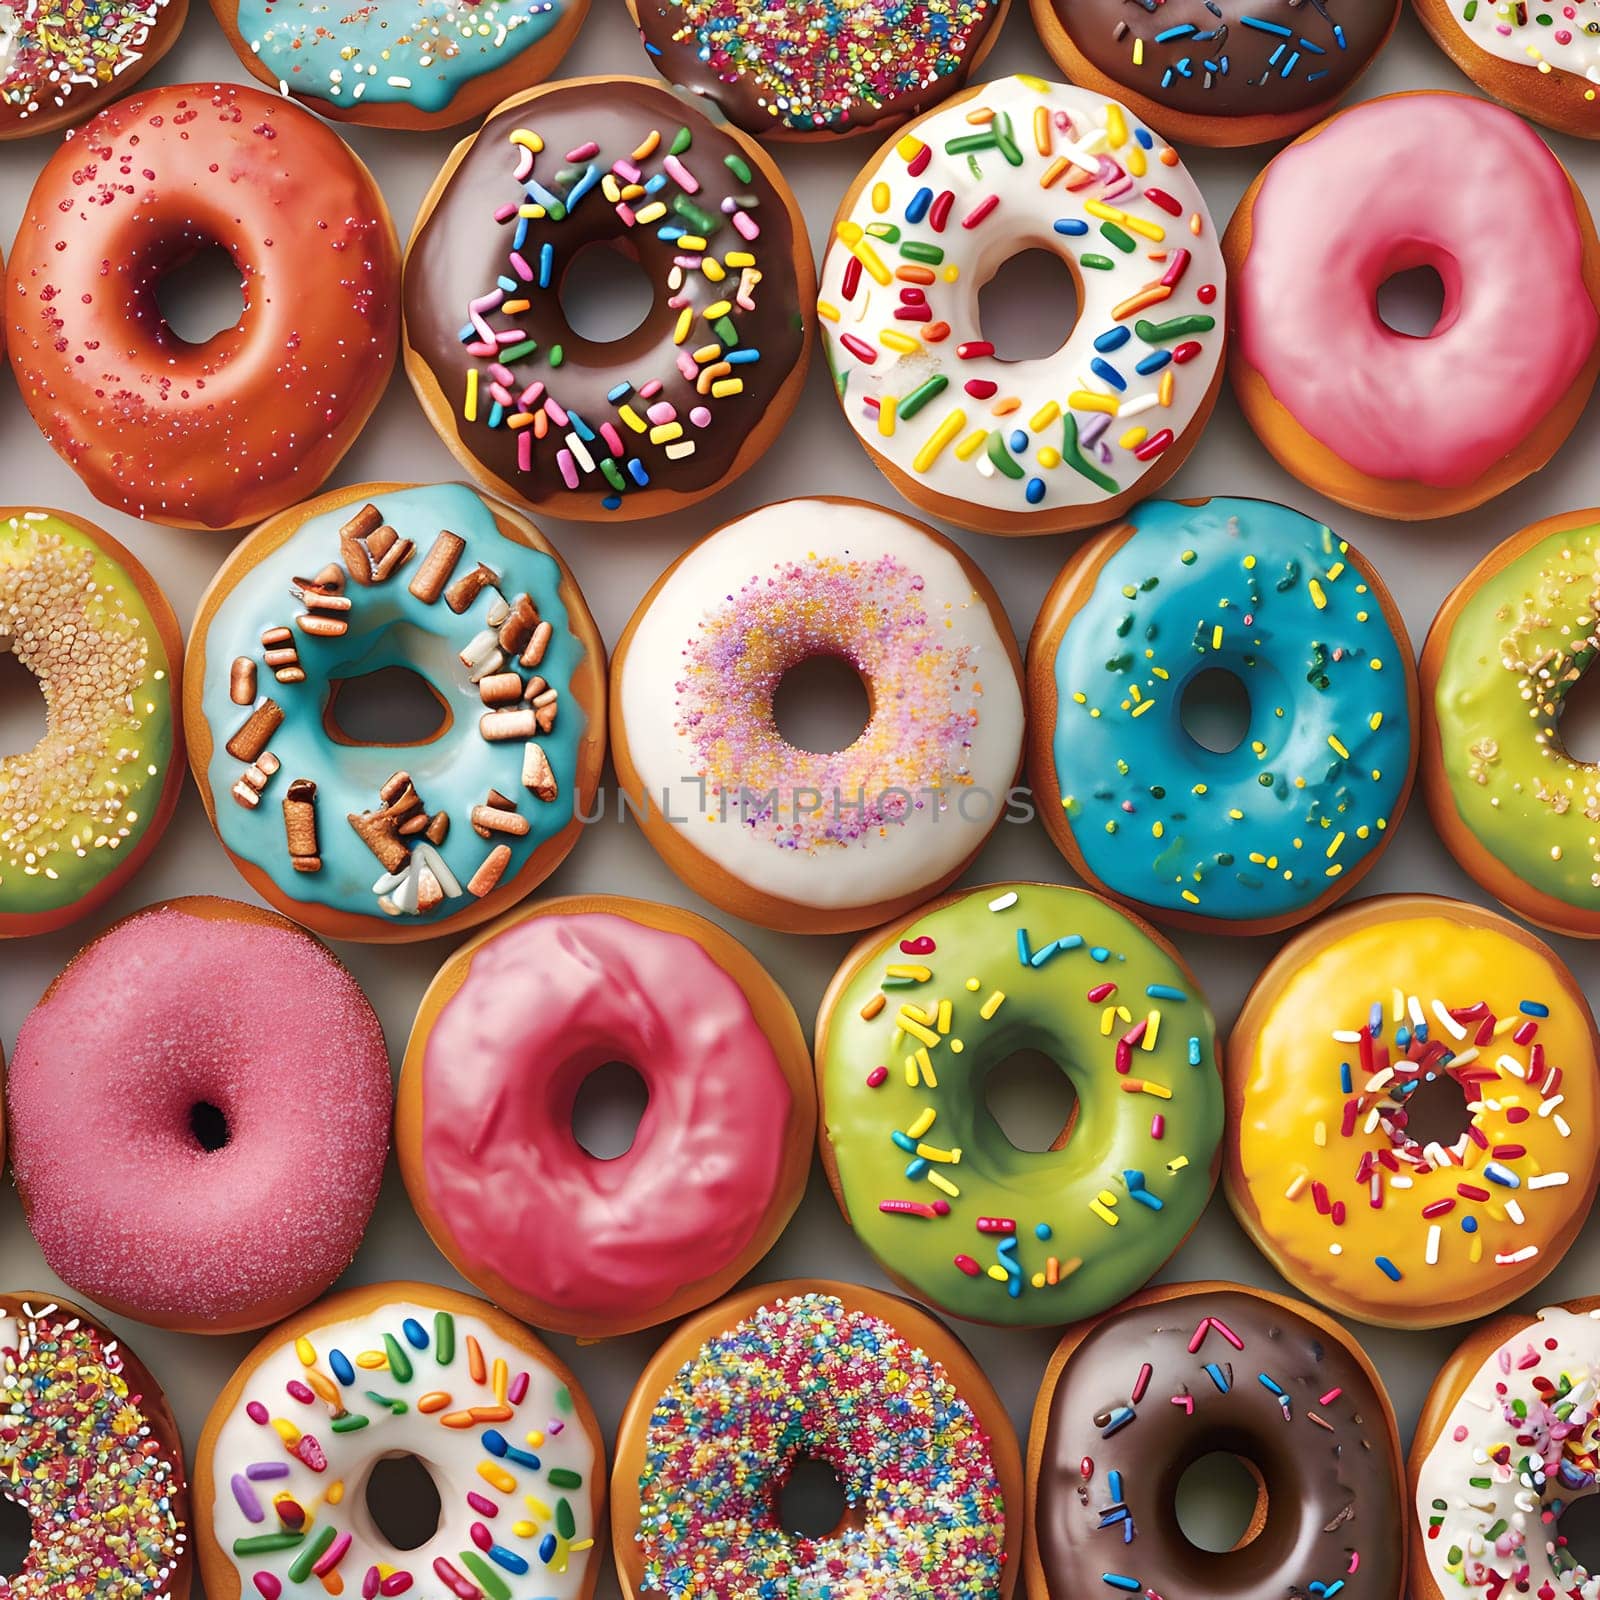 seamless texture and pattern of colorful glazed doughnuts with high angle view by z1b